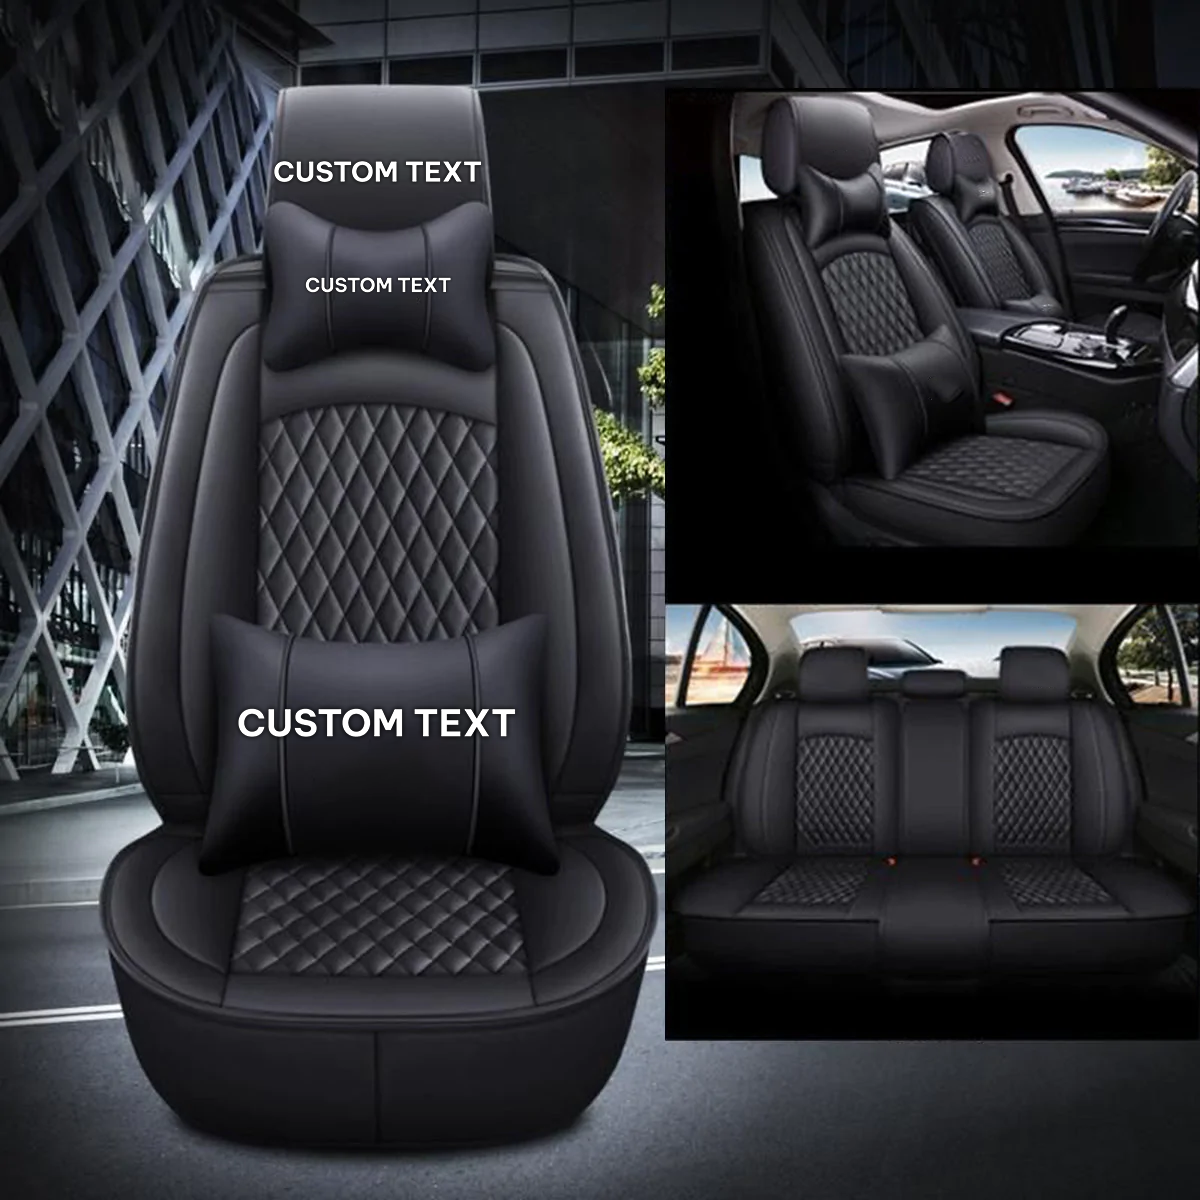 Custom Text For Seat Covers 5 Seats Full Set, Custom Fit For Your Cars, Leatherette Automotive Seat Cushion Protector Universal Fit, Vehicle Auto Interior Decor CC13988